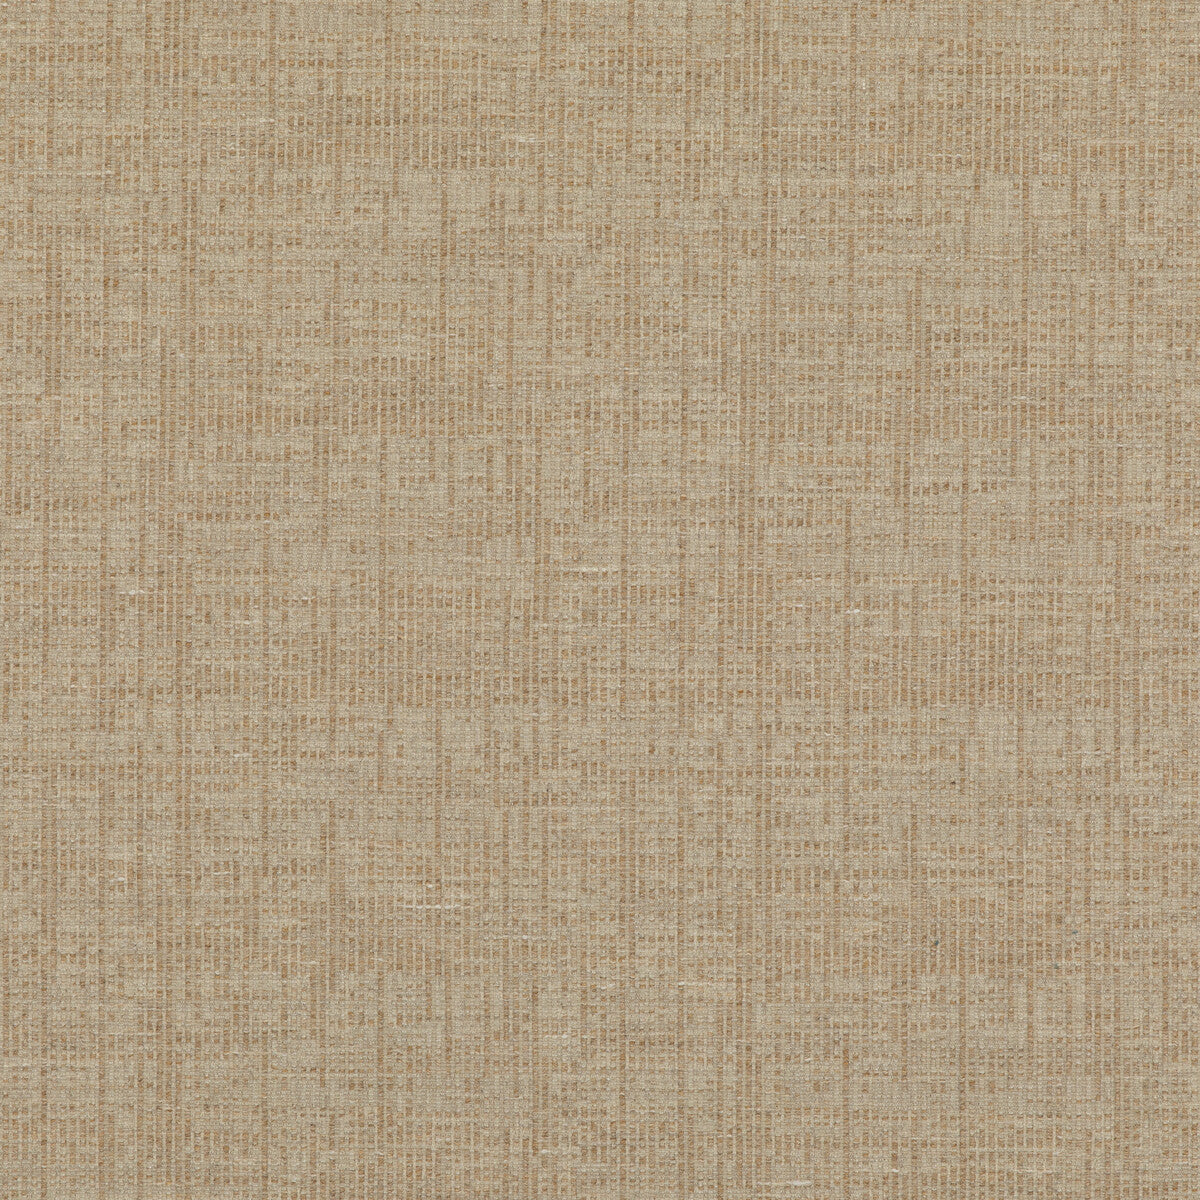 Umbra fabric in sand color - pattern ED85327.130.0 - by Threads in the Luxury Weaves II collection